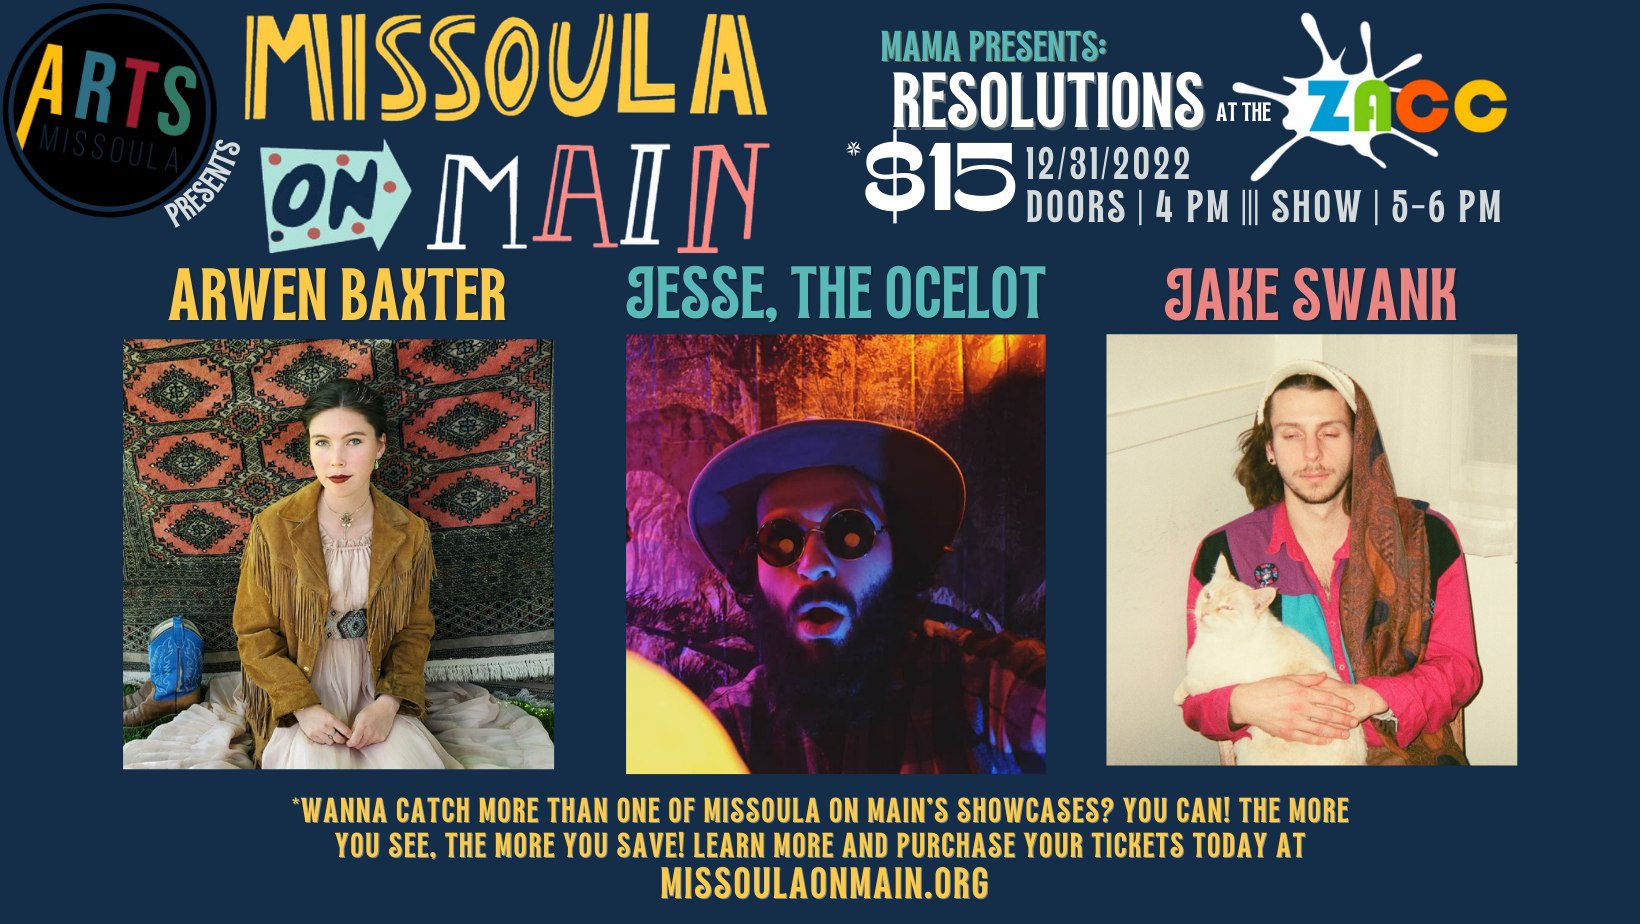 Missoula on Main / MAMA presents Resolutions at The ZACC on Saturday, December 31, 2022